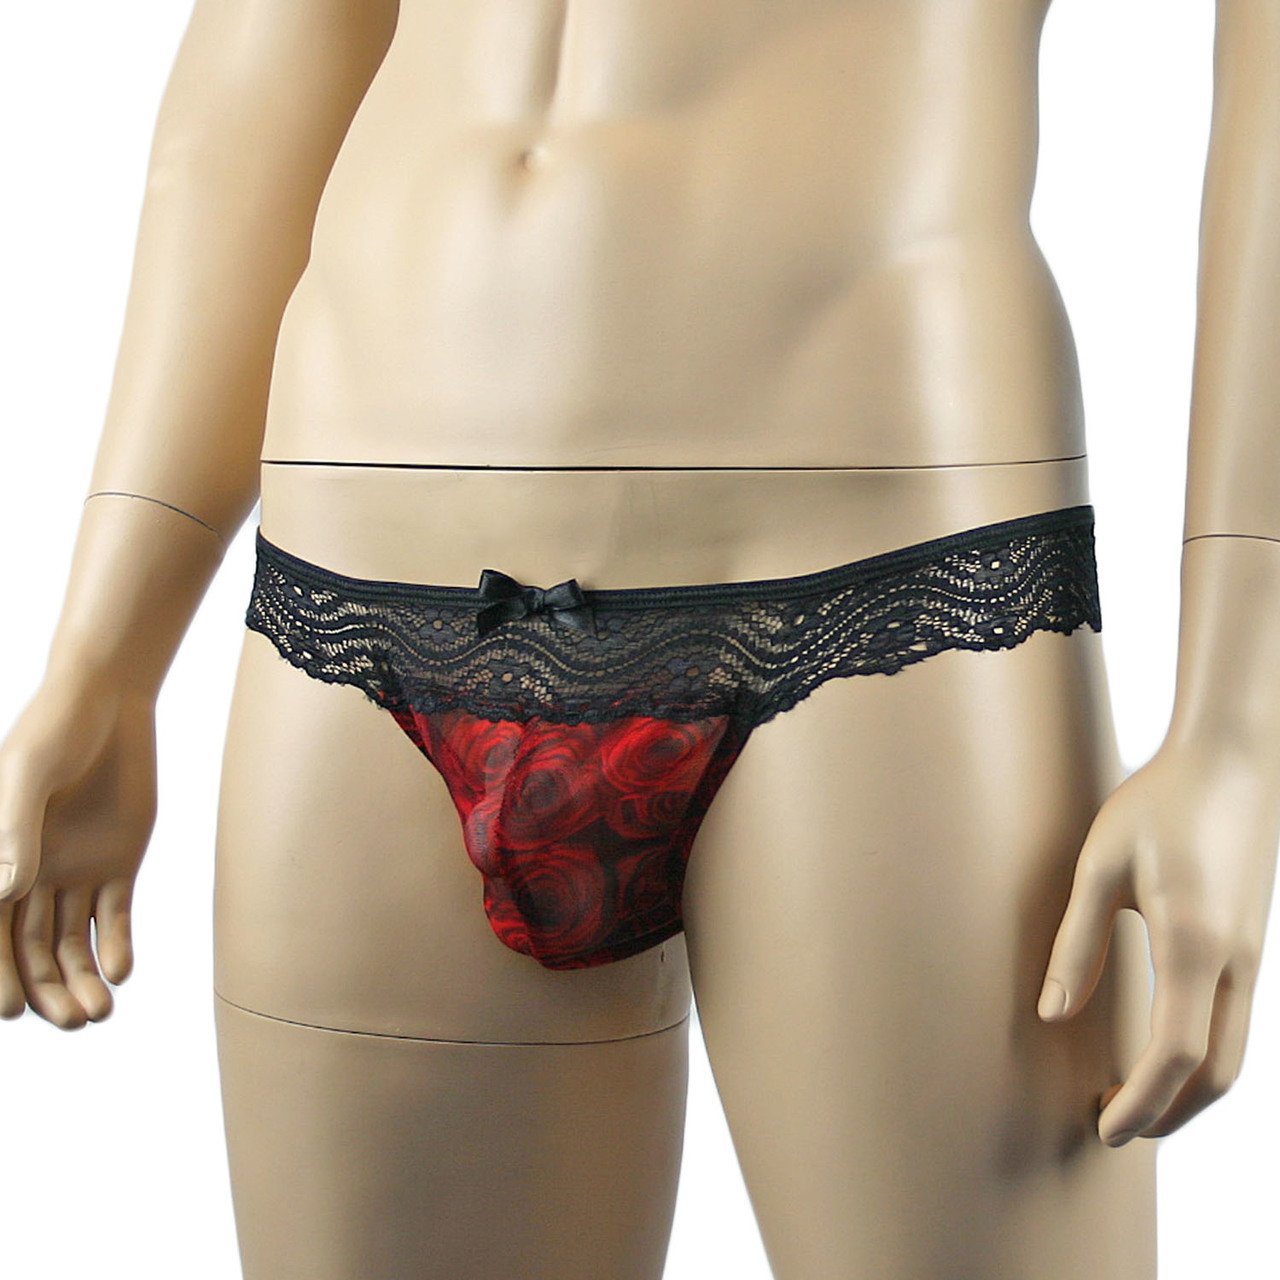 Mens Roses Thong, Sexy Sheer Lingerie Underwear Red Black